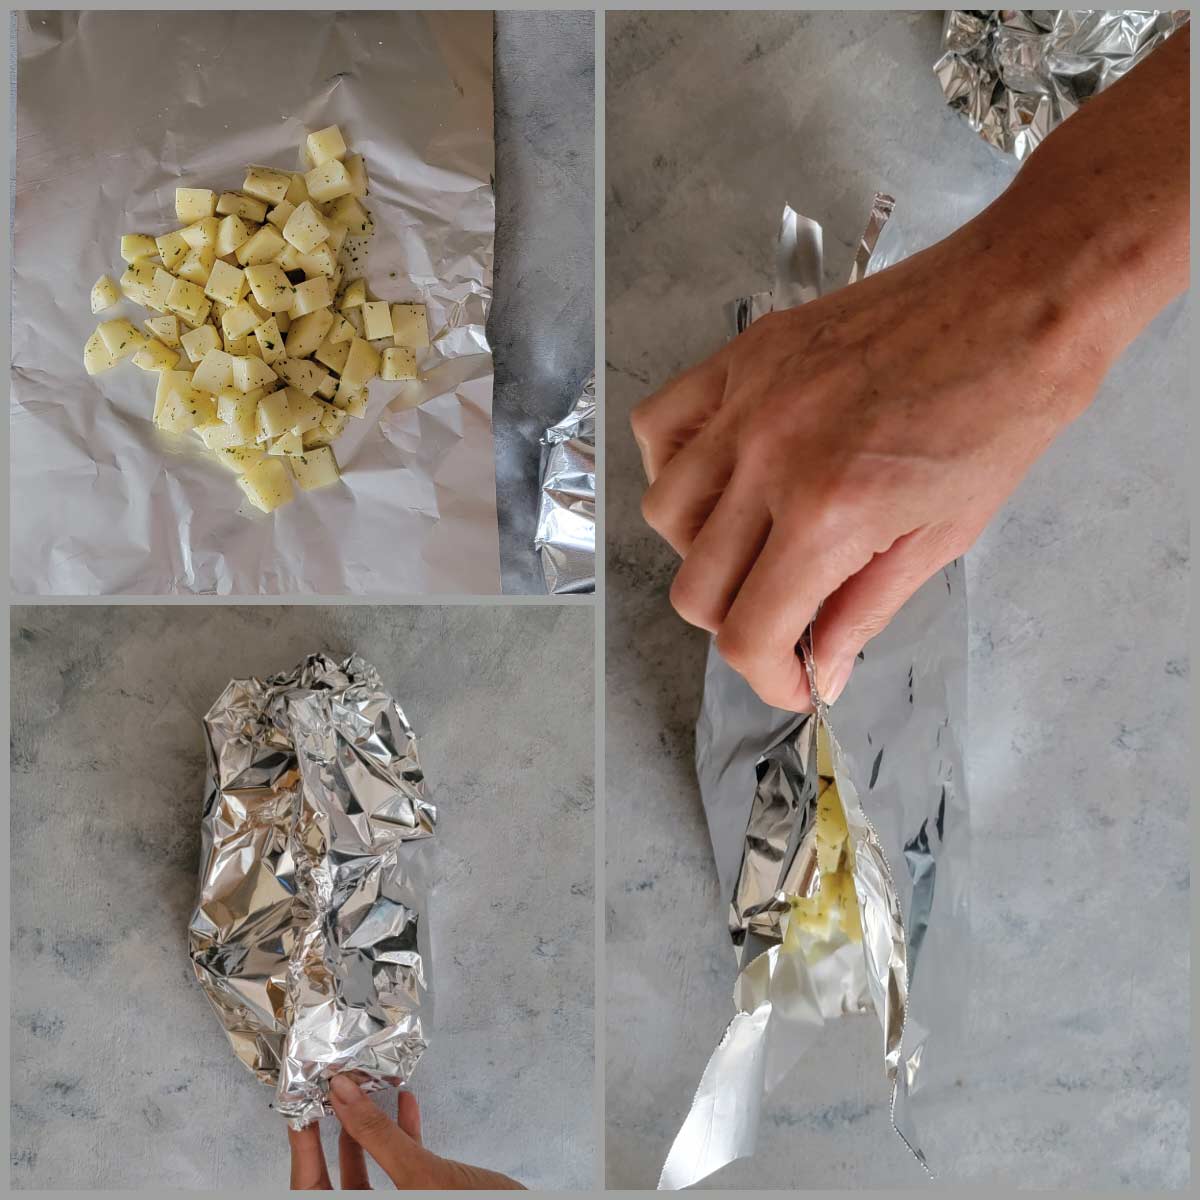 Steps to folding the foil packets.